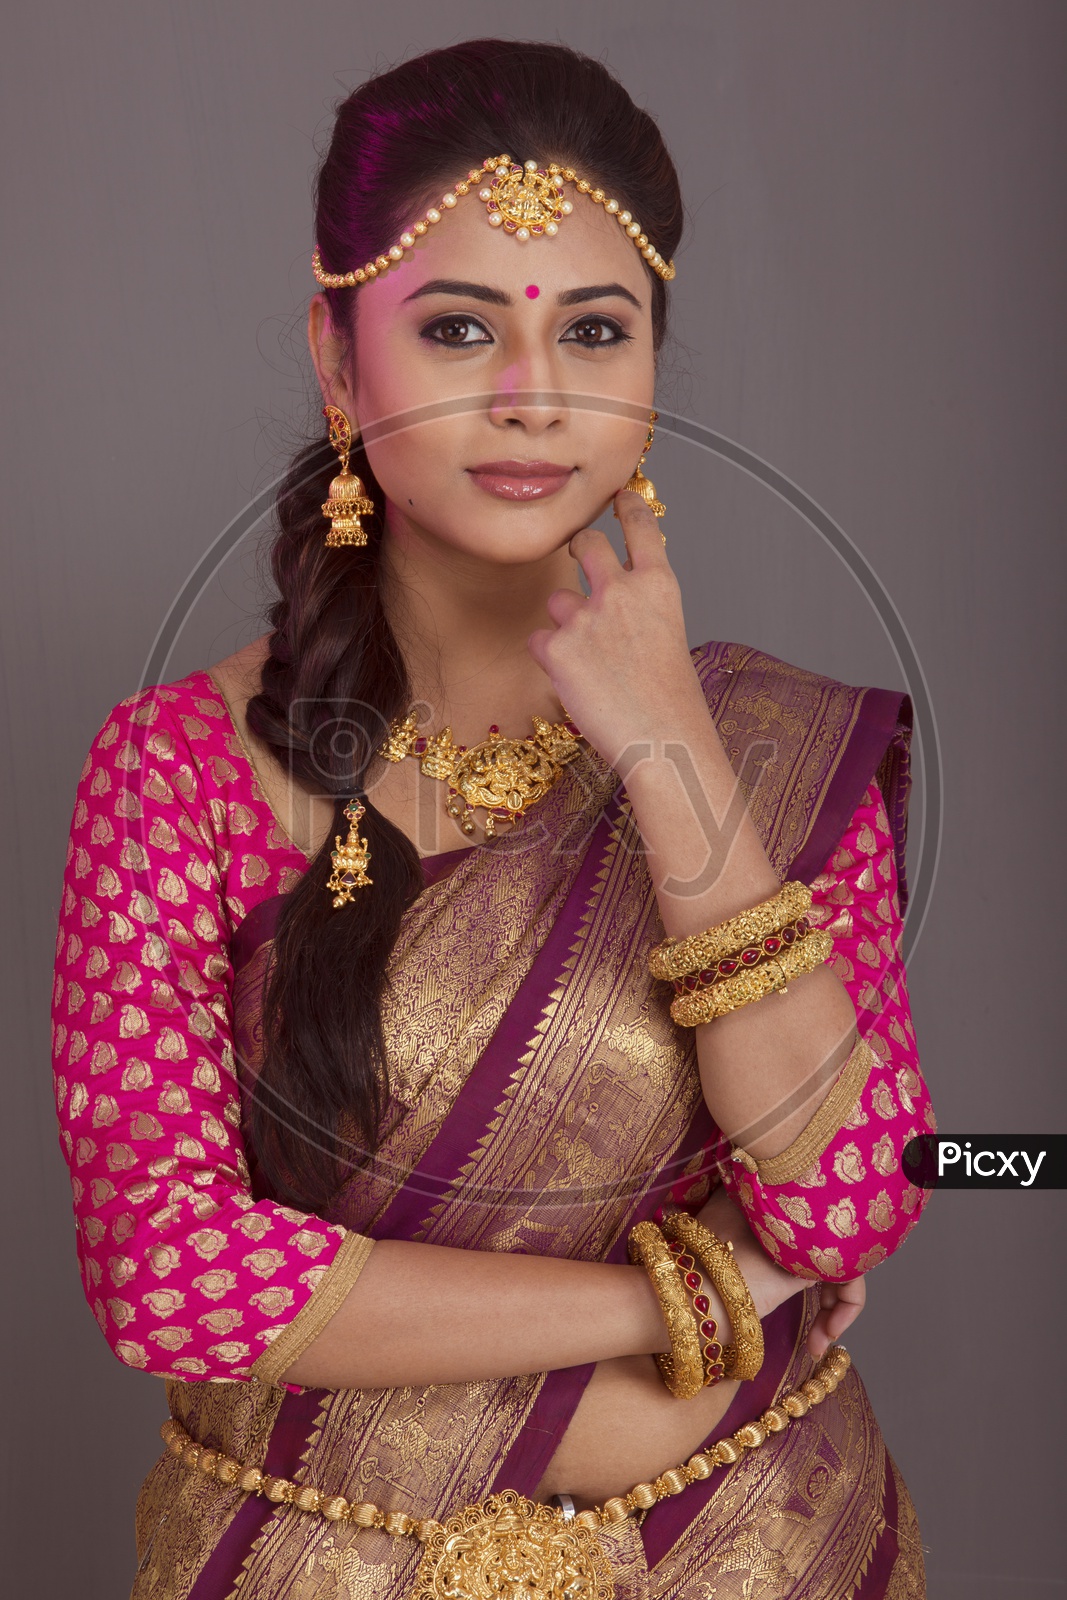 Indian bride dressed up in red saree  portrait in Studio Lighting / Traditionally dressed up girl